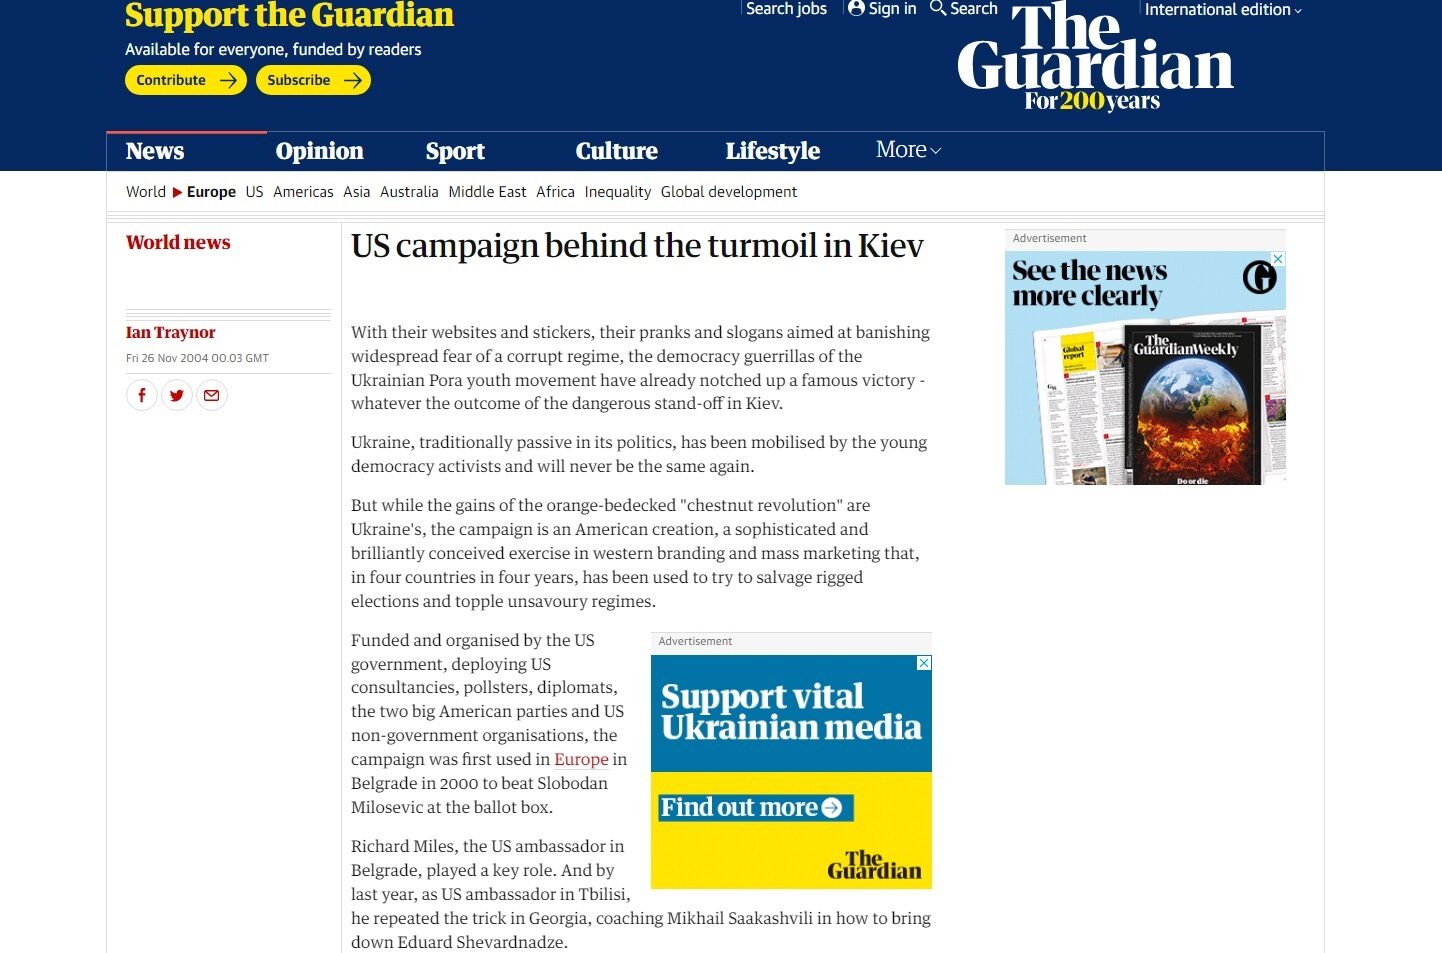 Image the Guardian